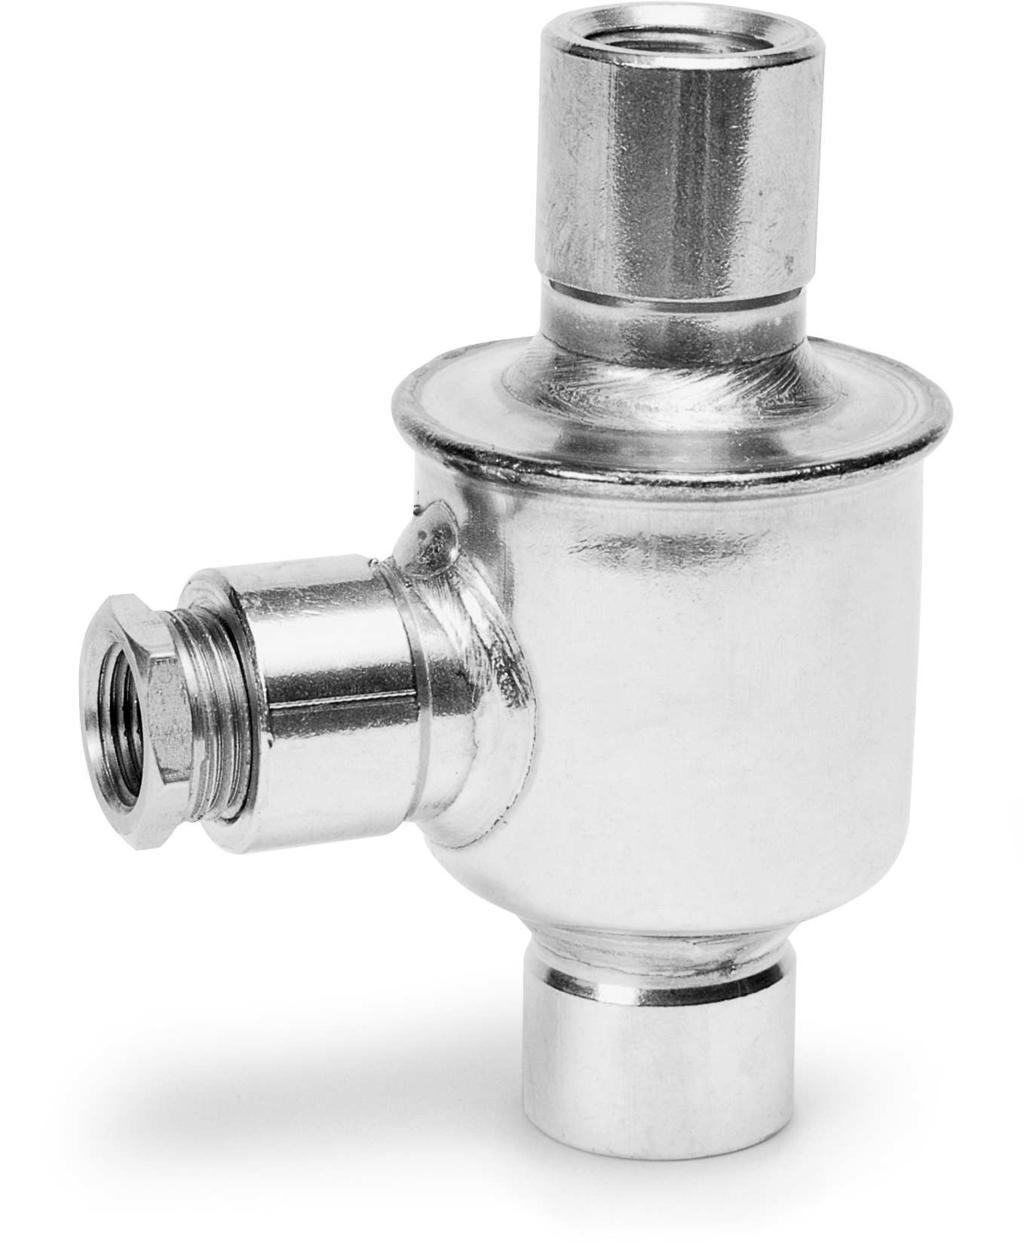 Thermostatic Air Vent/Vacuum Breaker F Pressures to 10 bar Capacities to 93 m³/h 58 mm B Vacuum Breaker 3/8" NPT 47 mm 87 mm The Armstrong TAVB is a combination thermostatic air vent/vacuum breaker